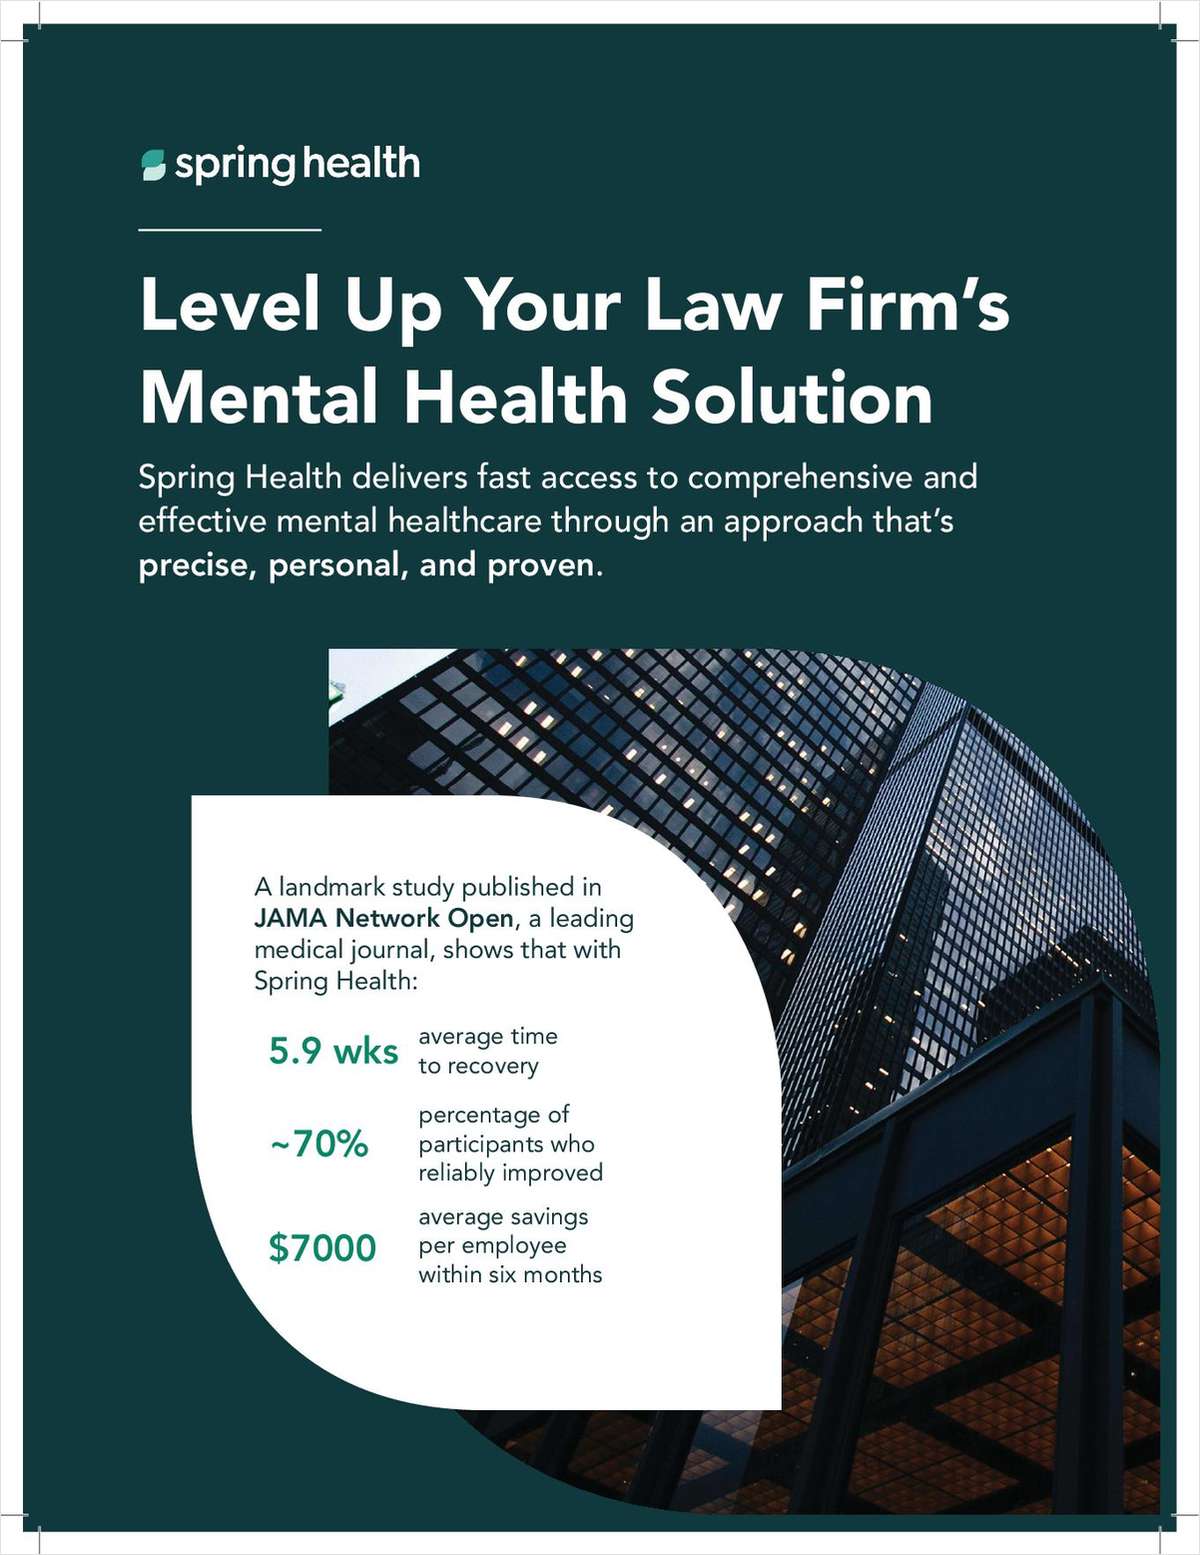 Level Up Your Law Firm's Mental Health Solution